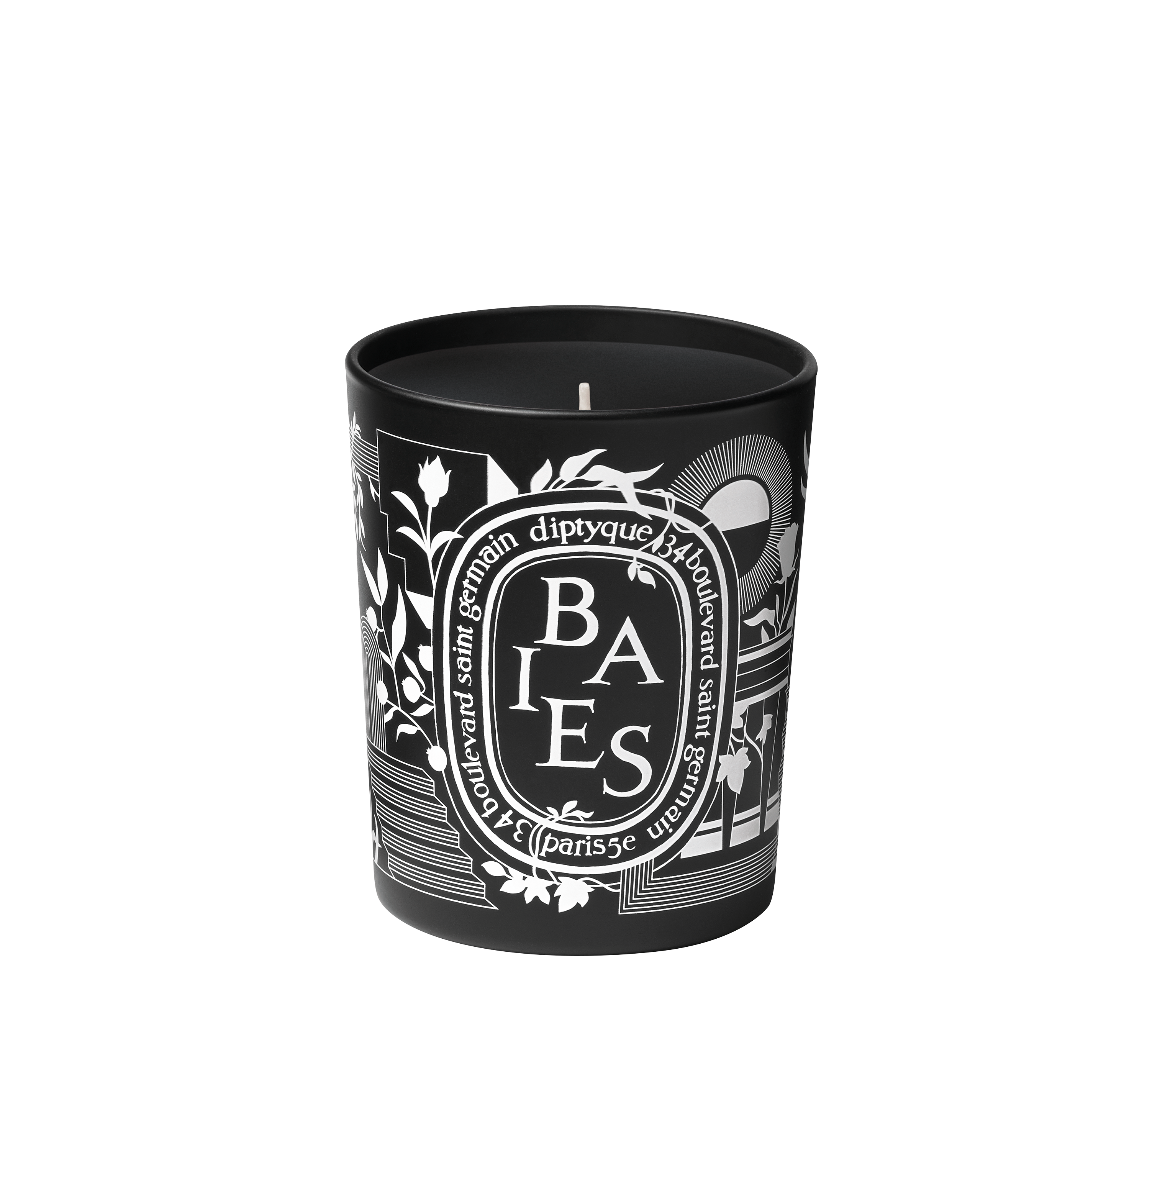 Limited-Edition Baies Candle